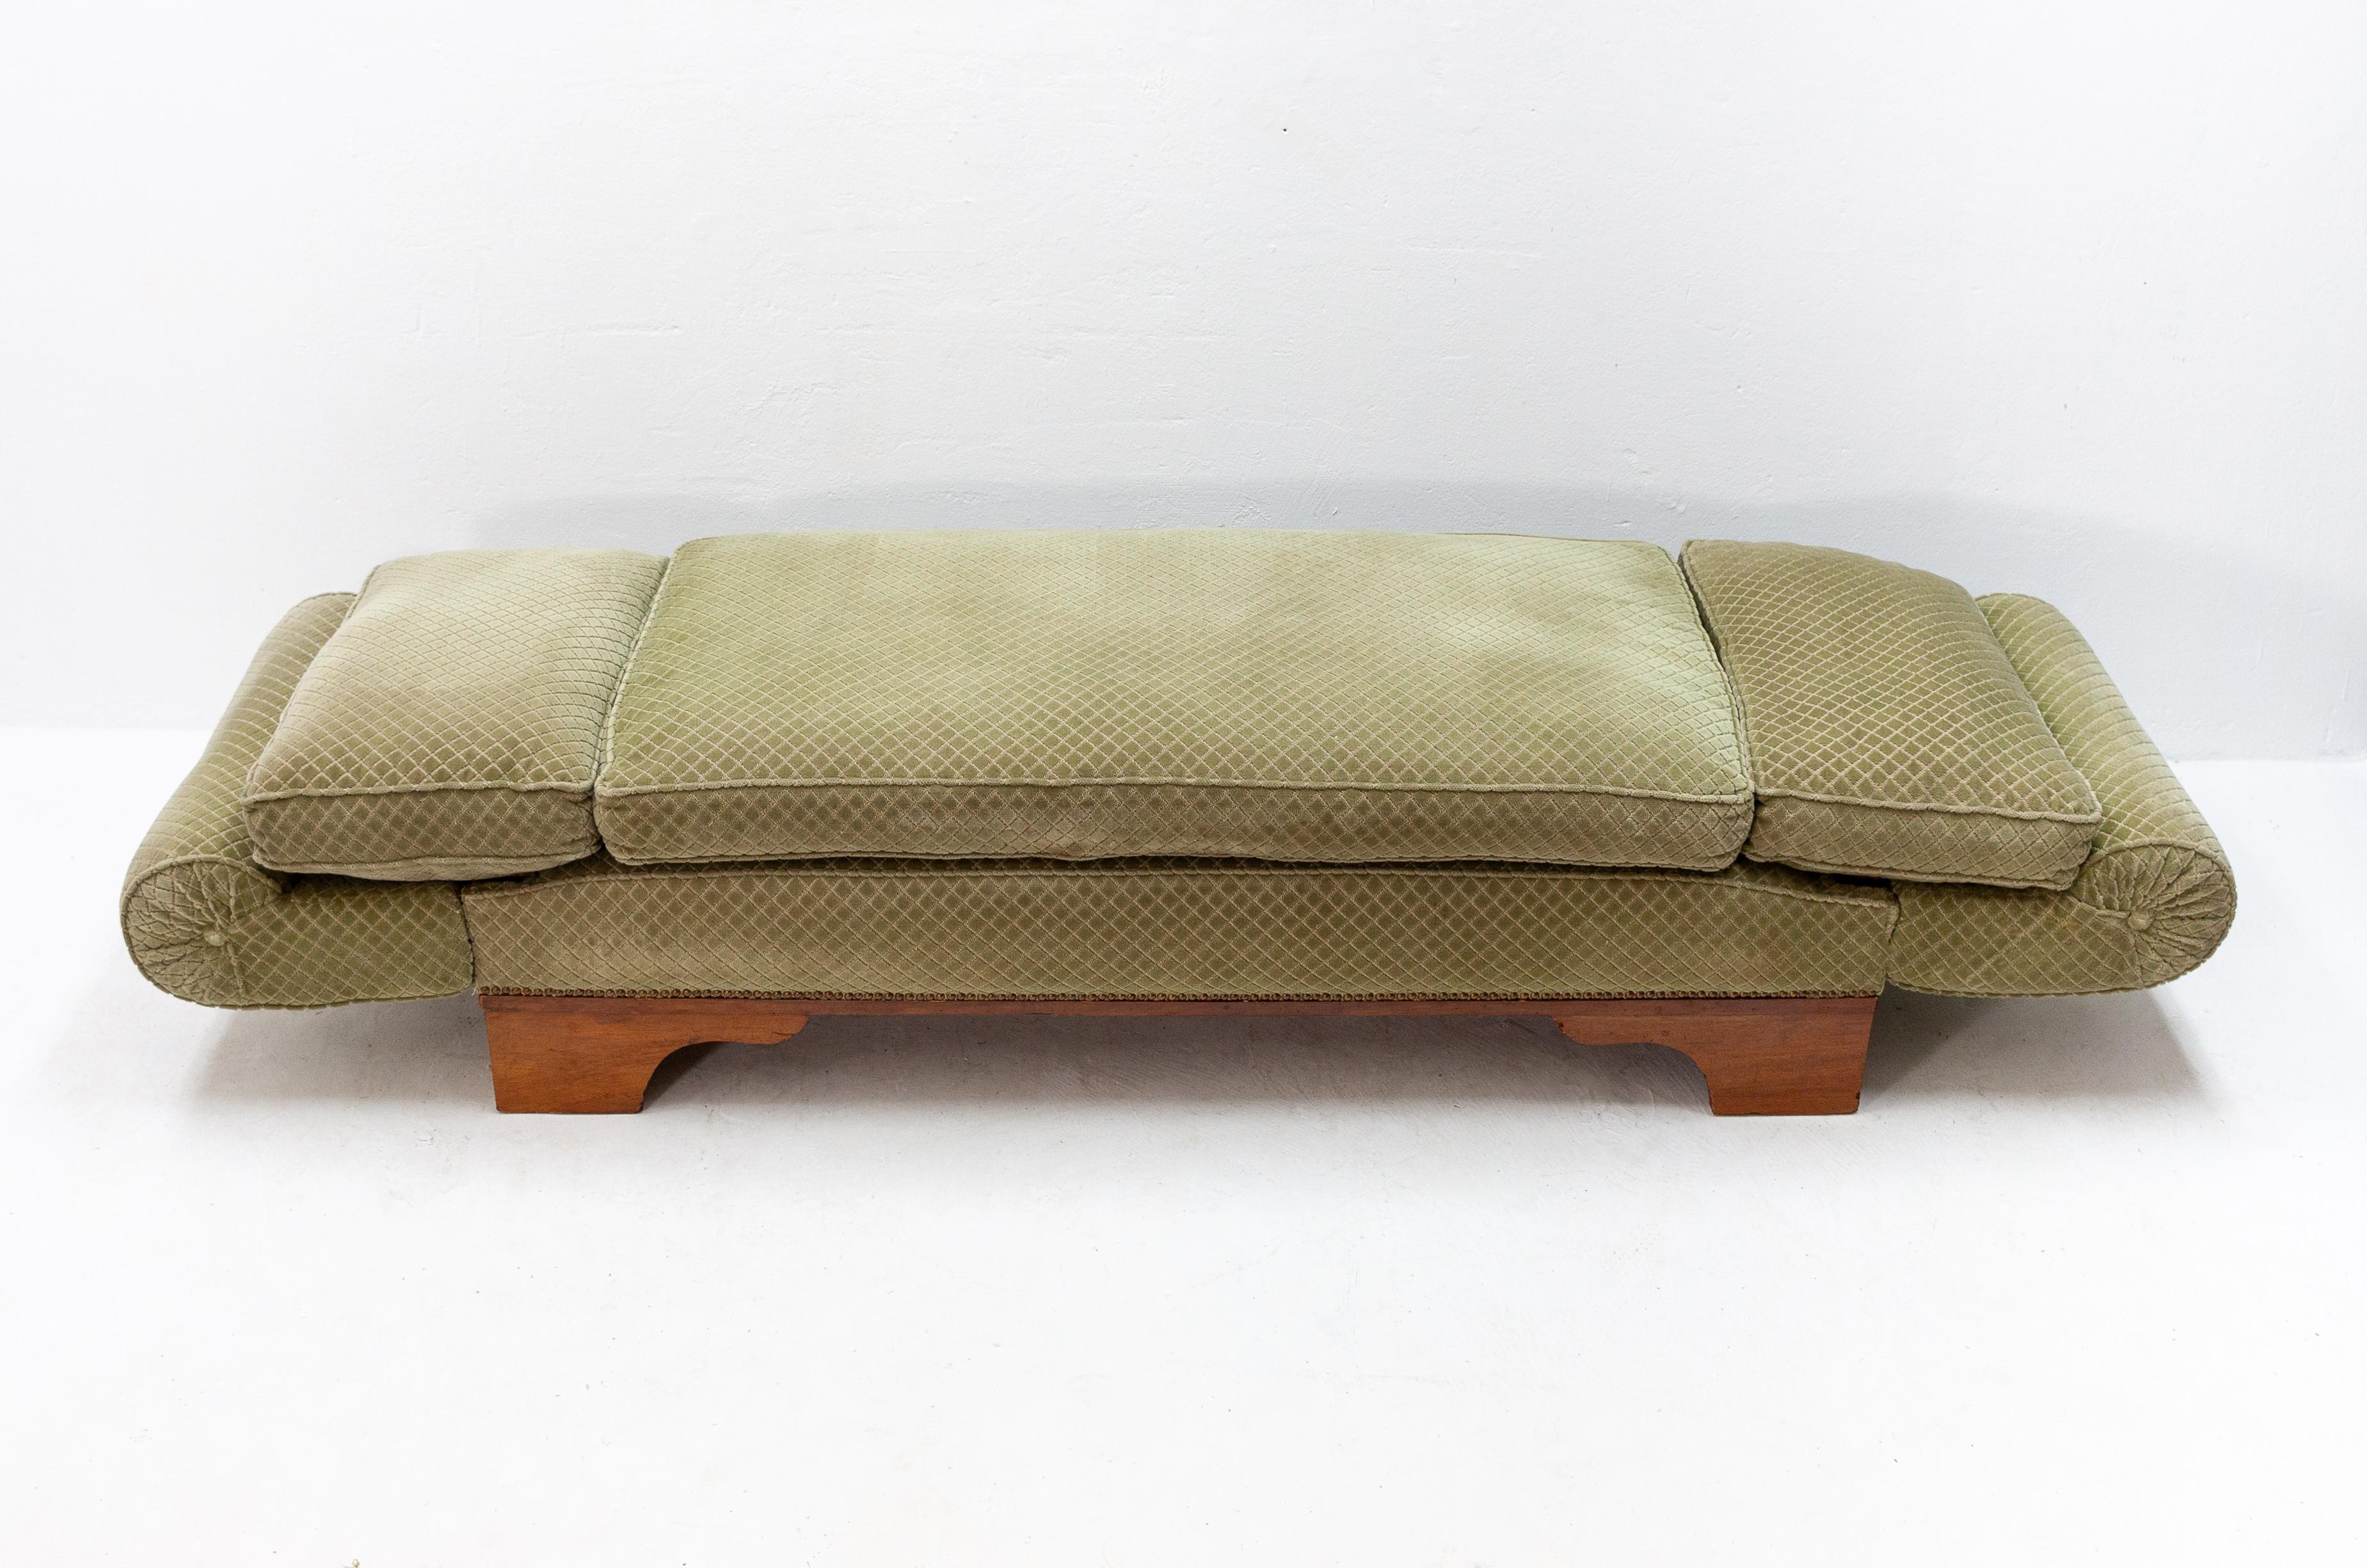 Beautiful France drop arm daybed, 1920-1930. Some years ago, the upholstery on this daybed is completely redone. Included the springs. Good condition, no stains or smells. This bed can be used as a bed or a sofa, Great looking piece.
  